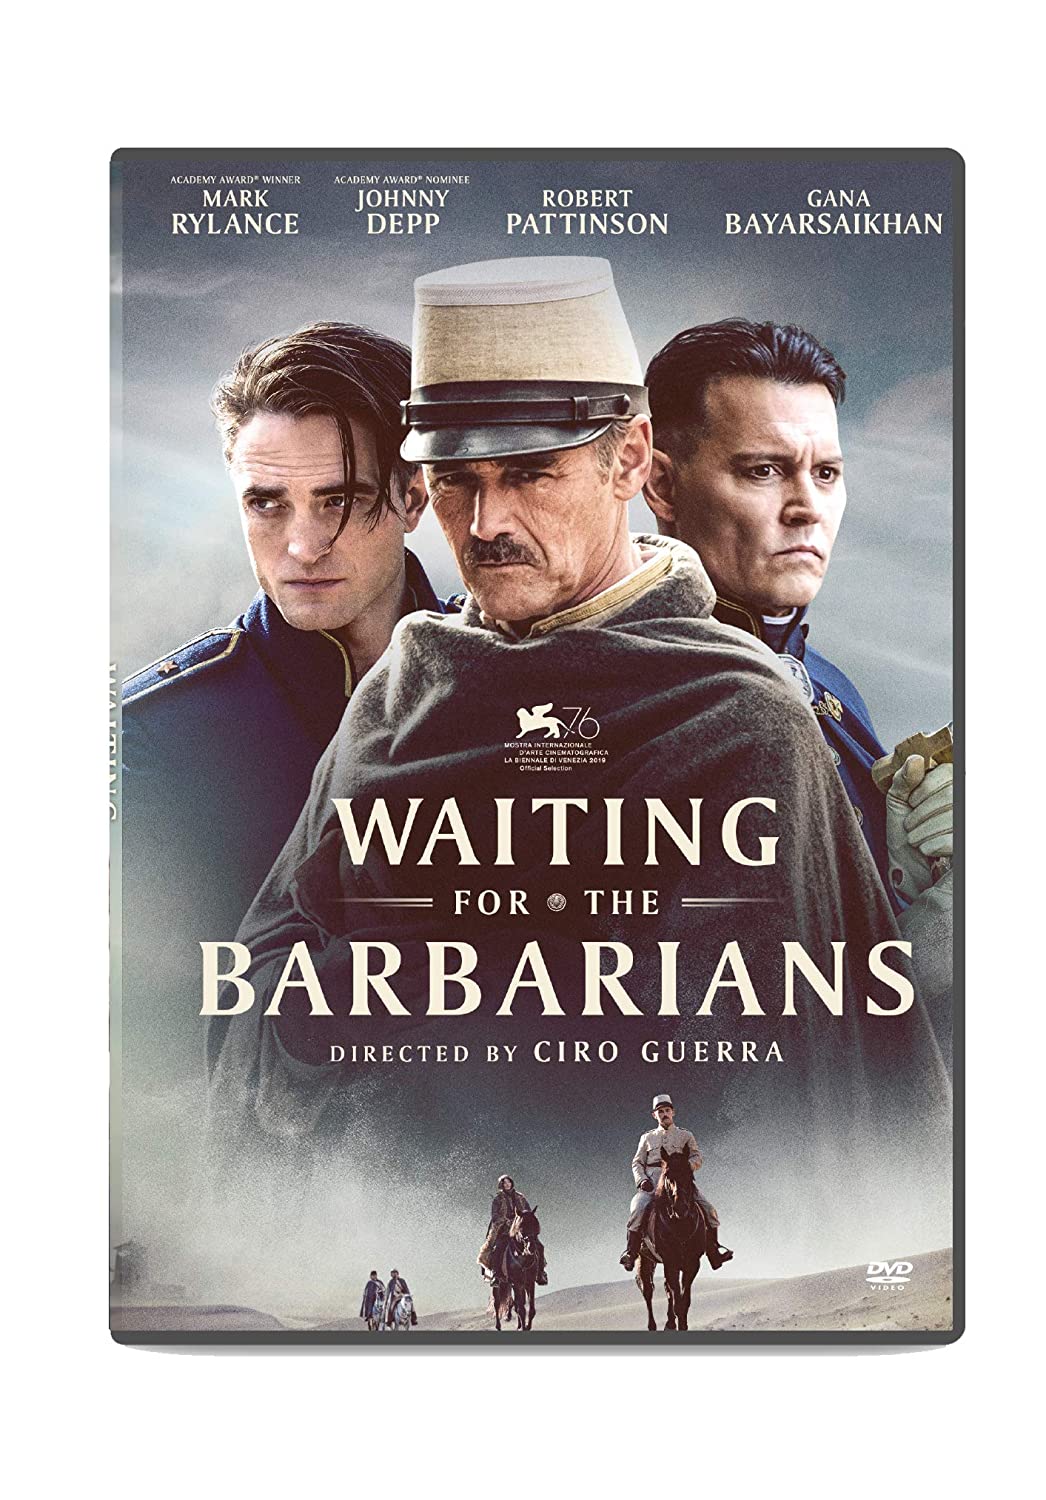 Johnny Depp Waiting For The Barbarians Wallpapers